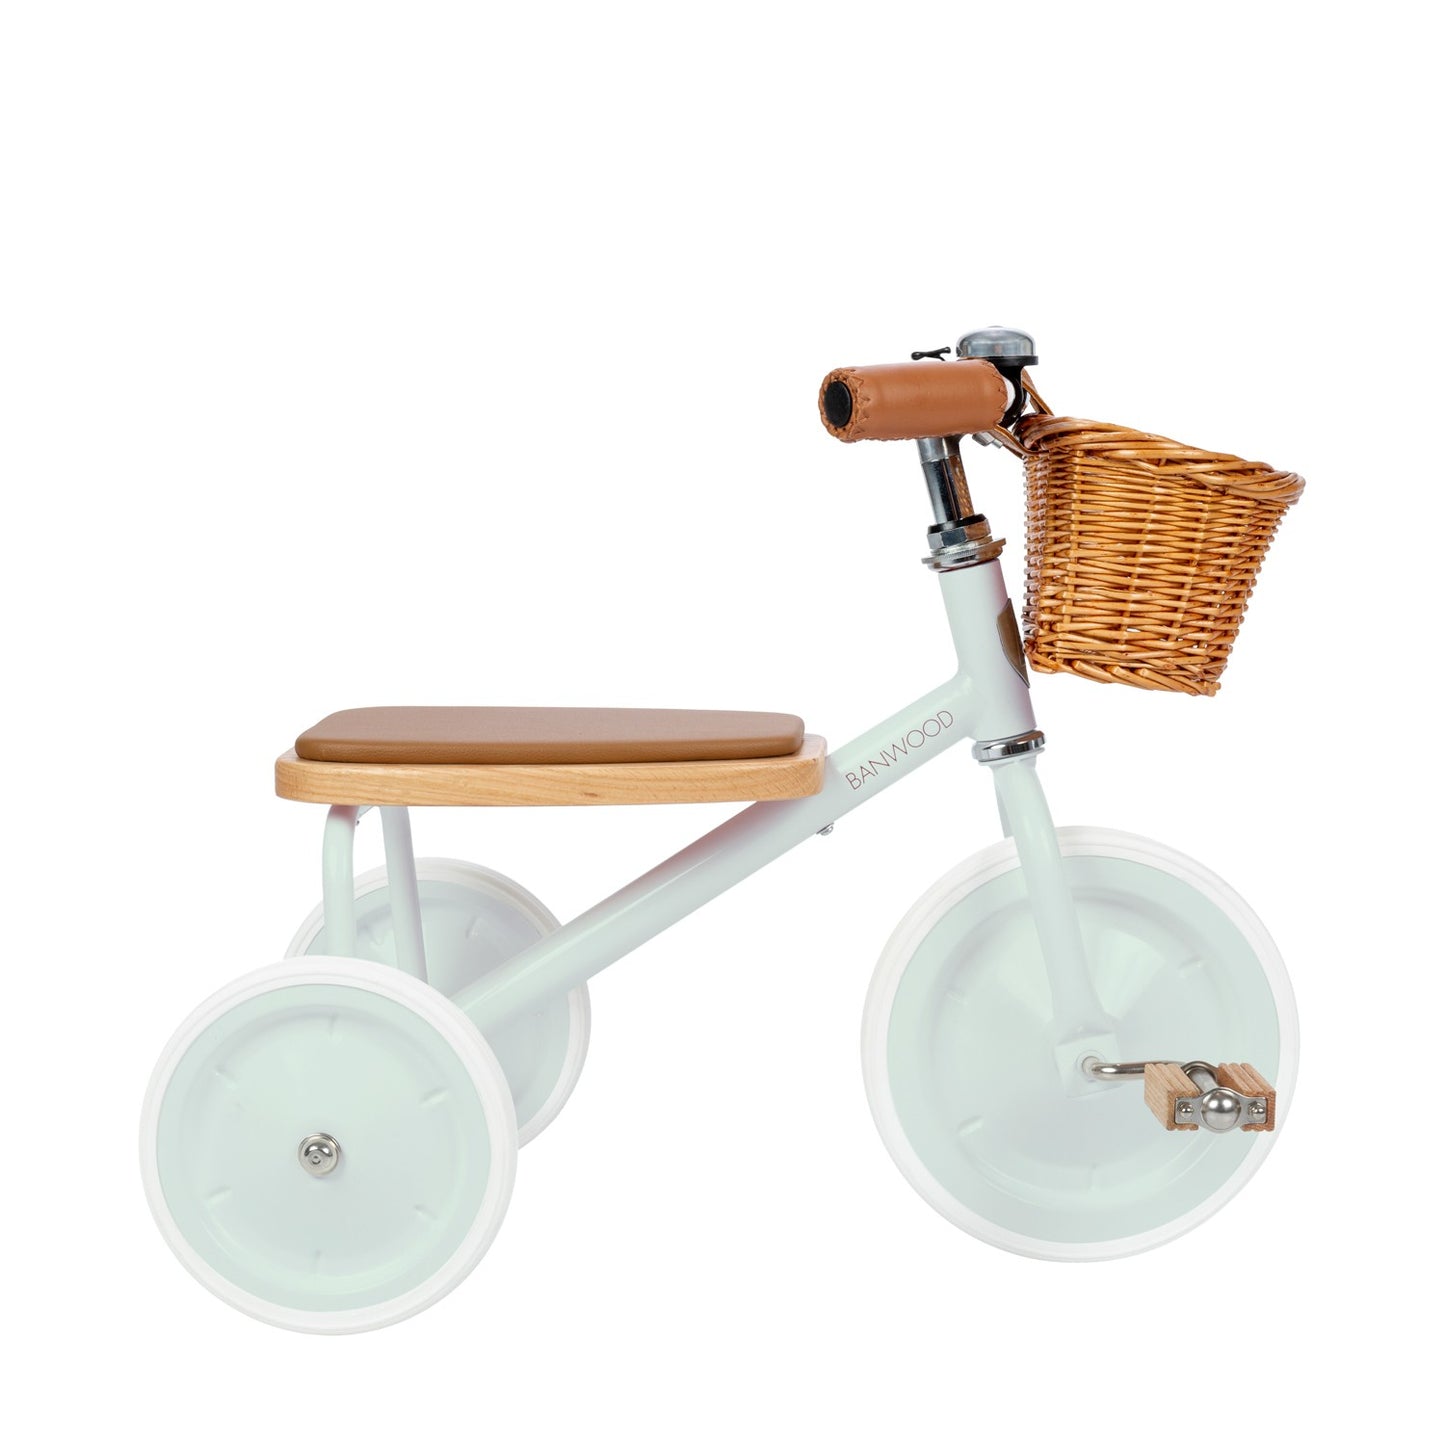 Load image into Gallery viewer, Pale Mint Vintage Trike with Basket
